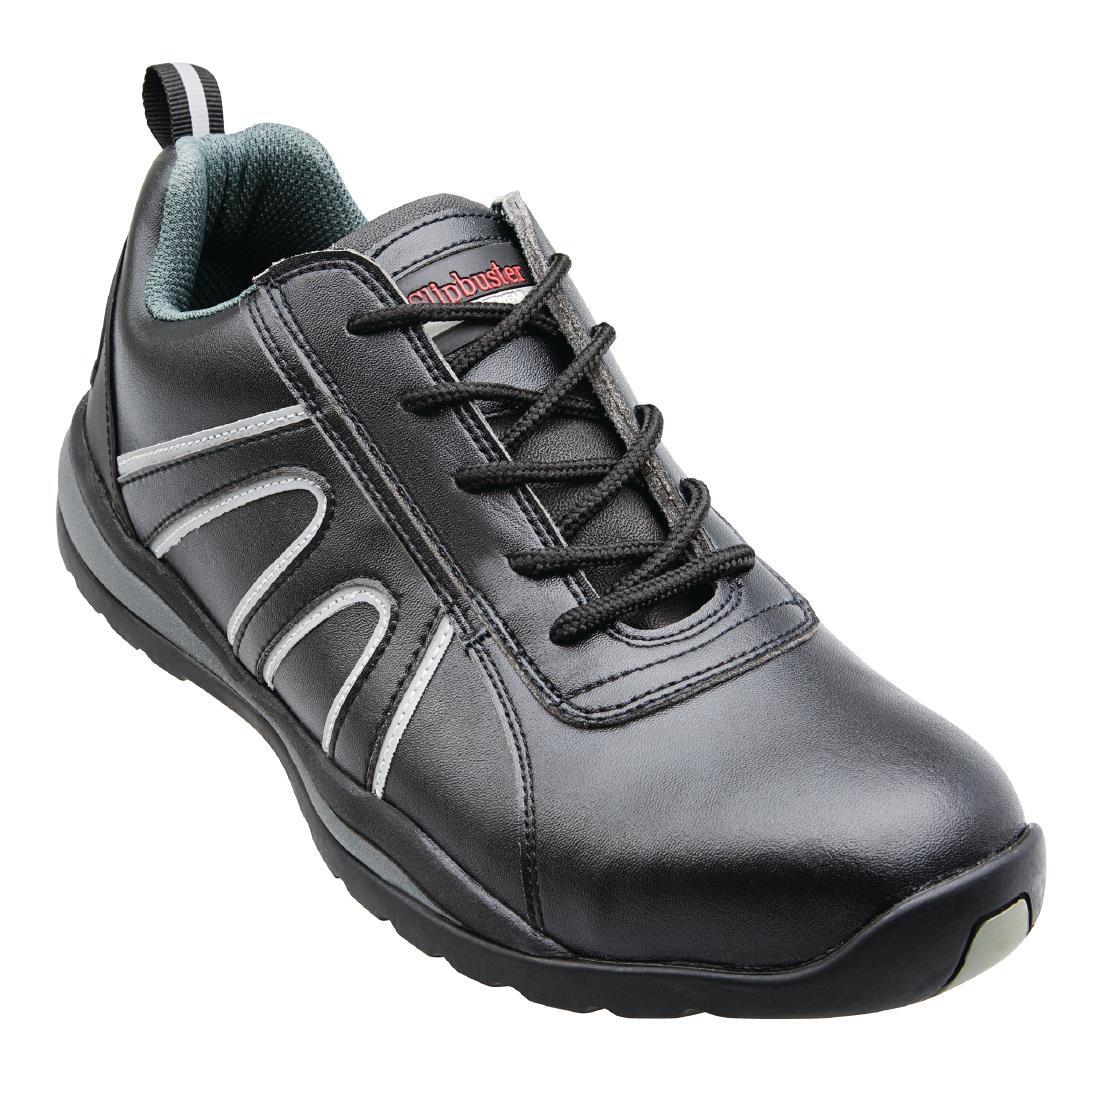 Slipbuster Safety Trainers Black 45 - A708-45  - 6